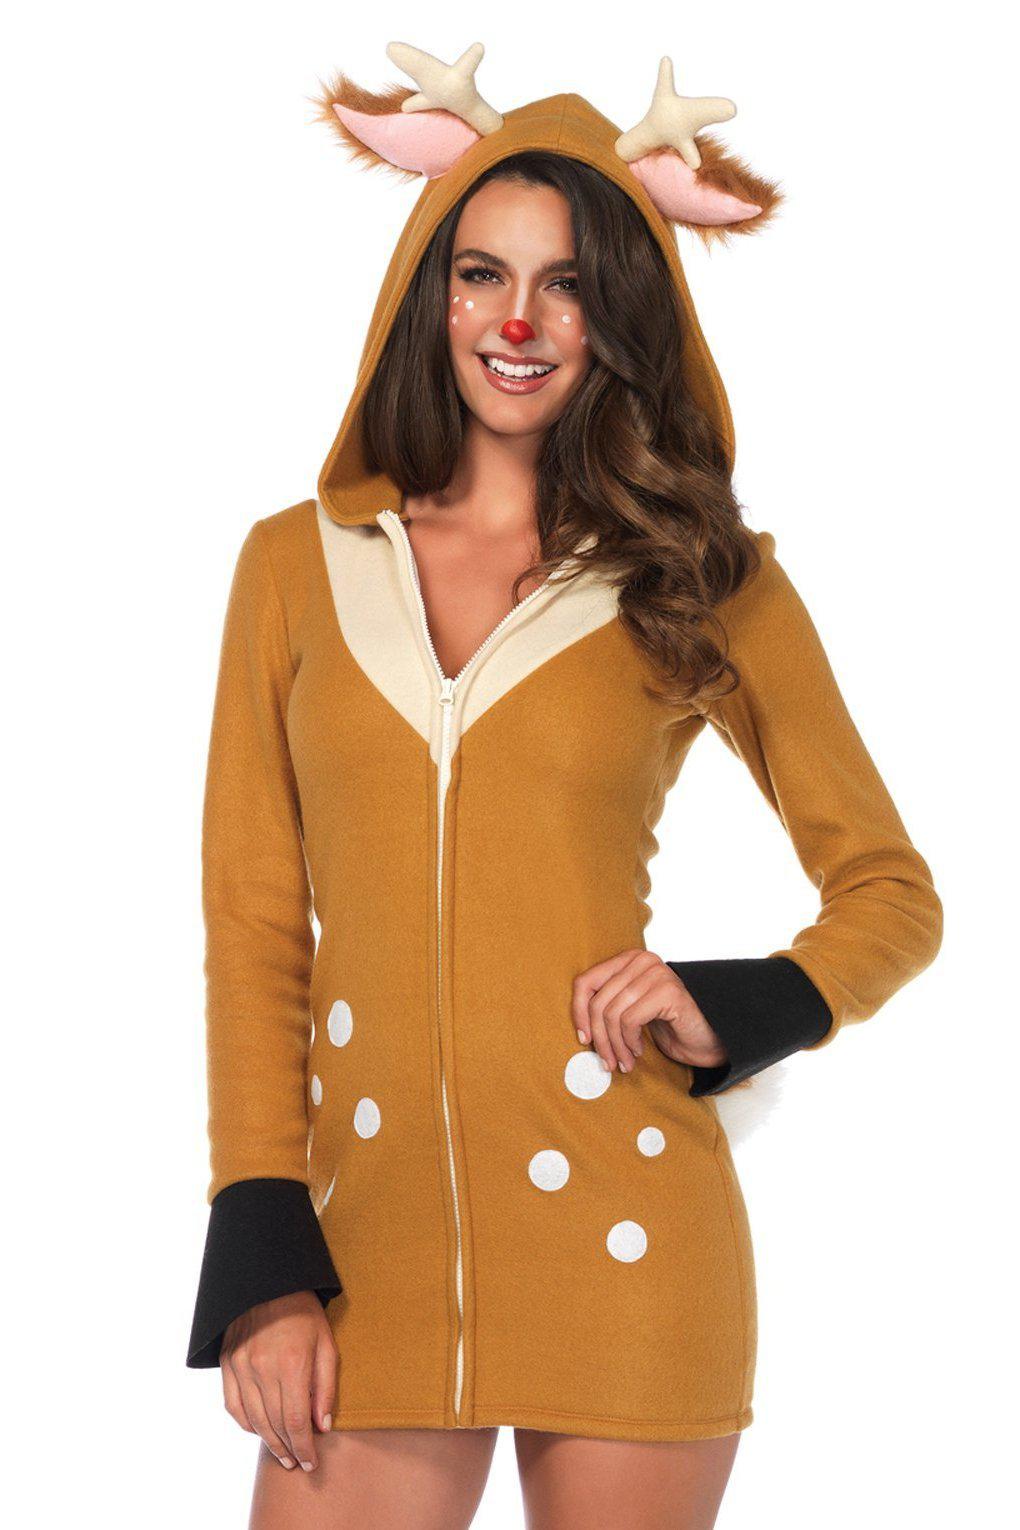 Sexy Fawn Costume Dress-Animal Costumes-Leg Avenue-Brown-S-SEXYSHOES.COM